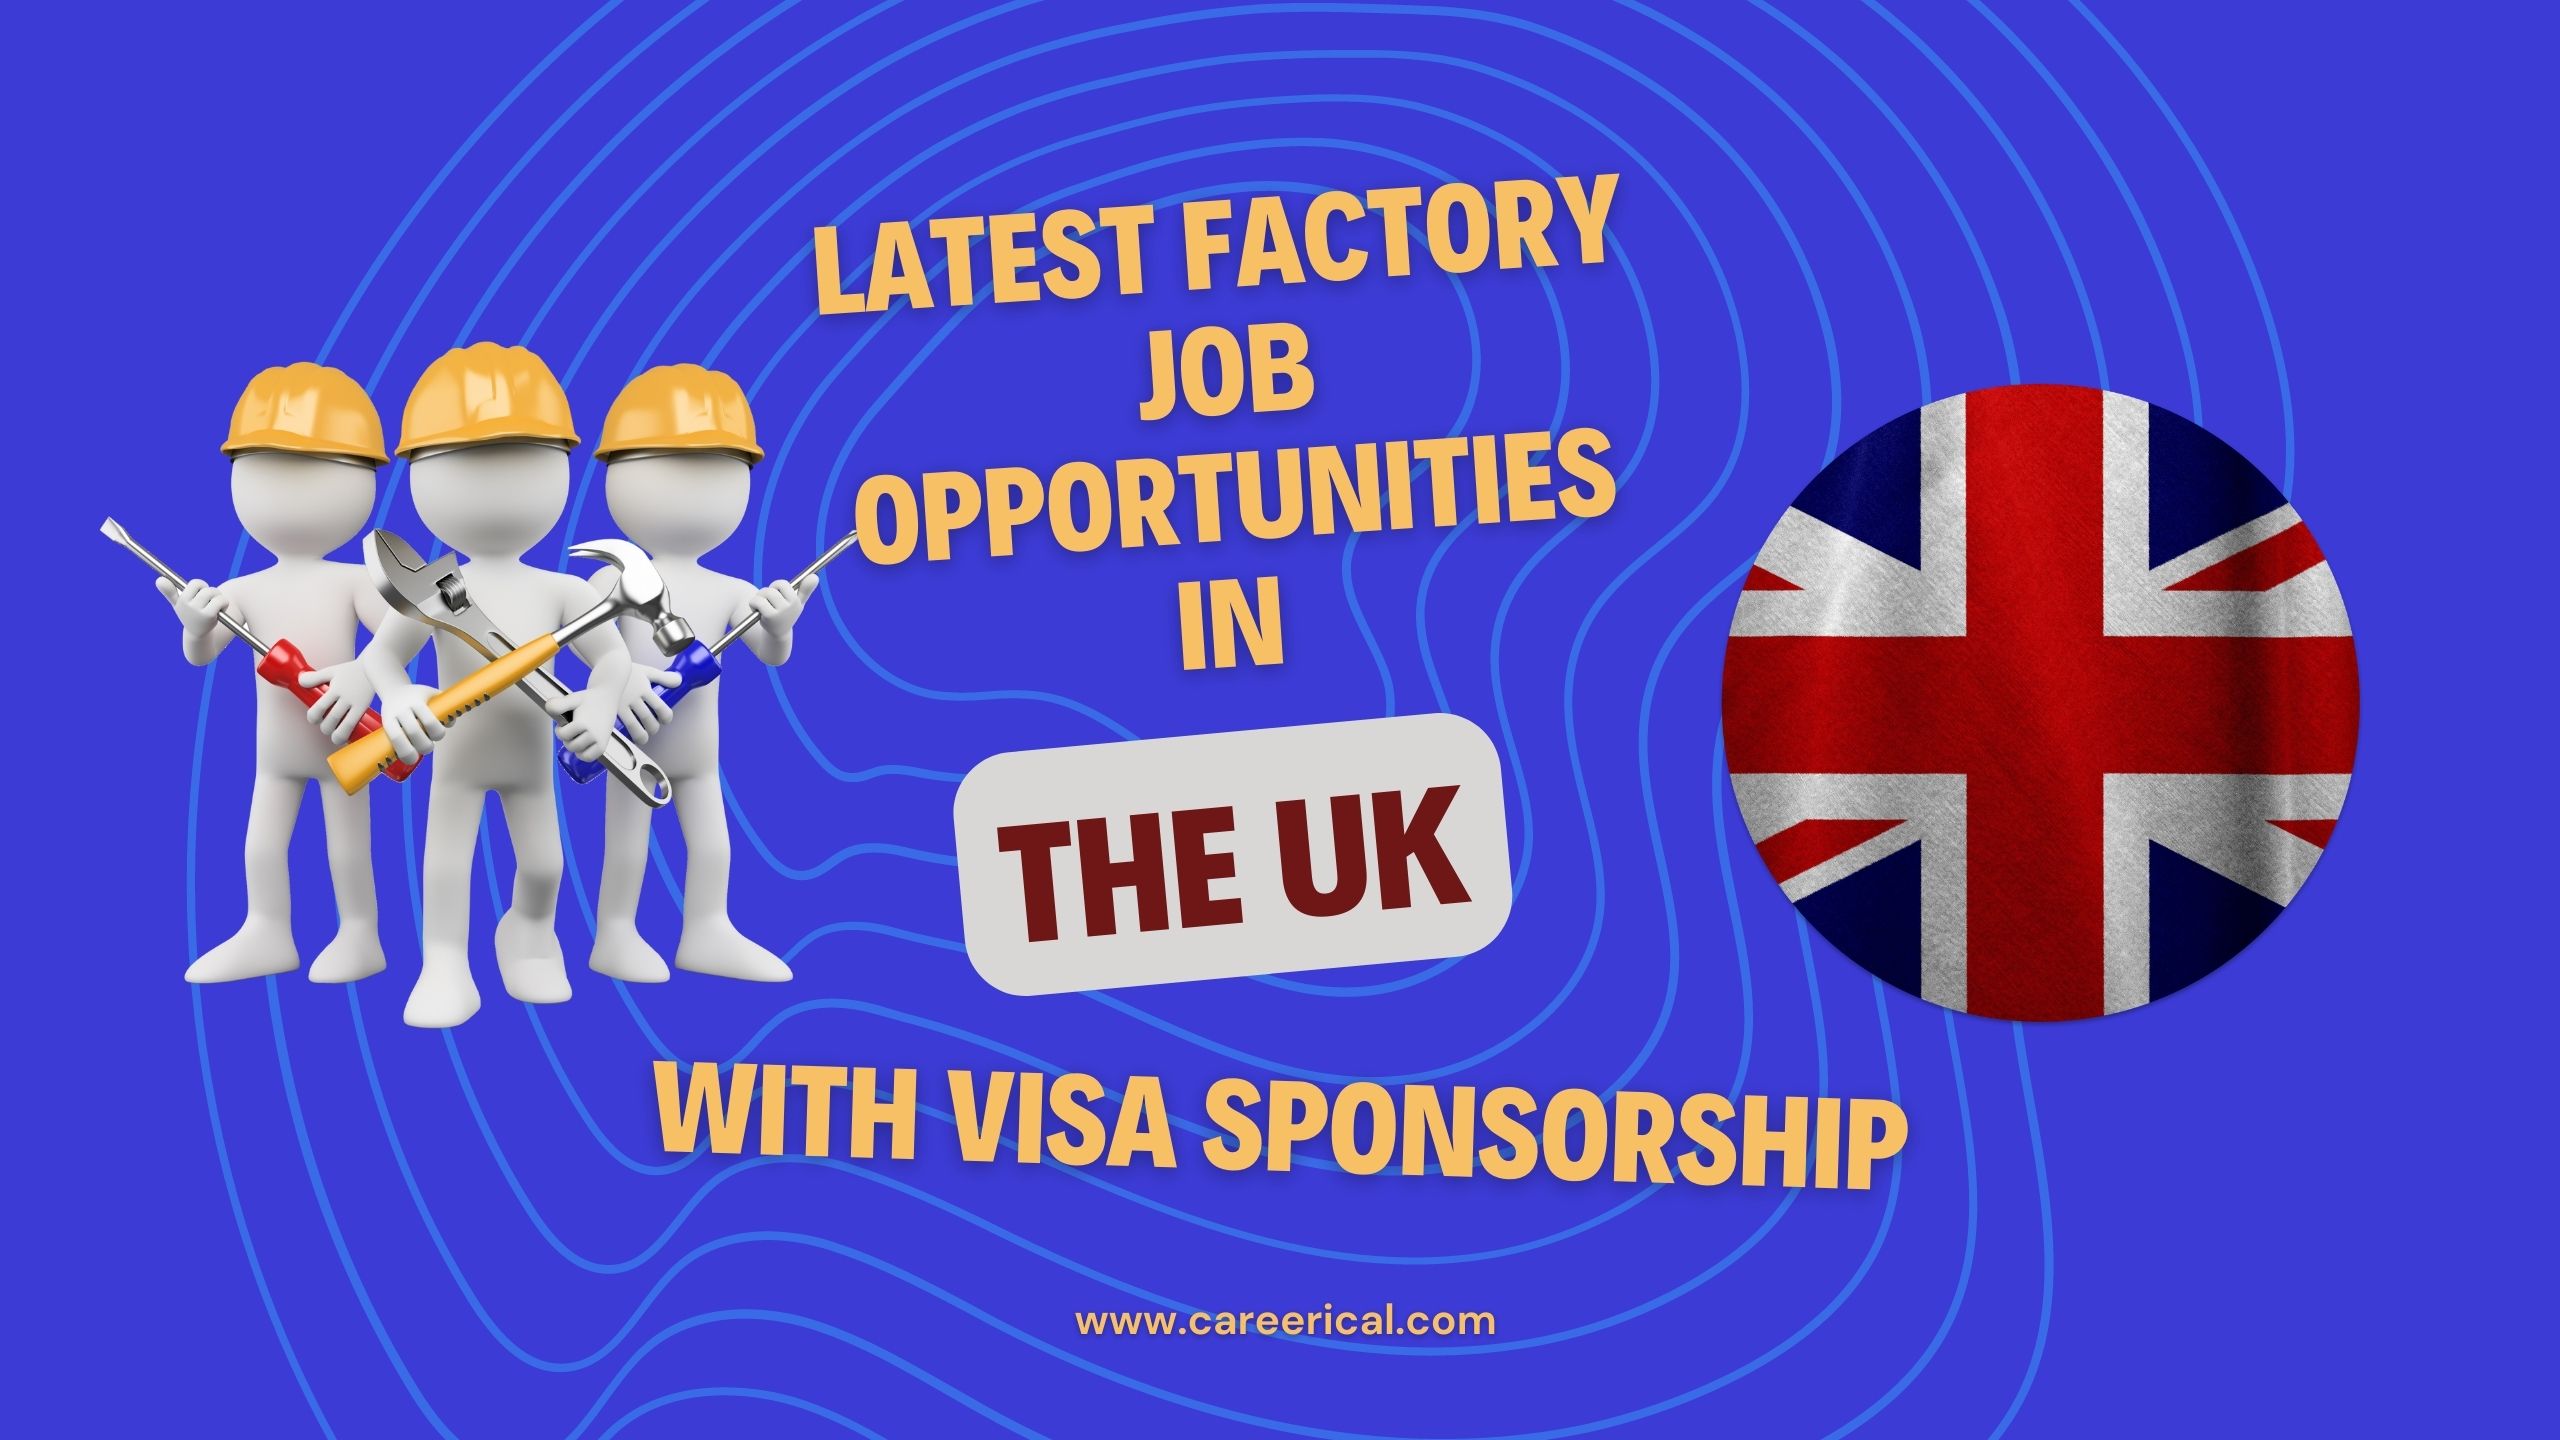 Latest Factory Job Opportunities in the UK with Visa Sponsorship